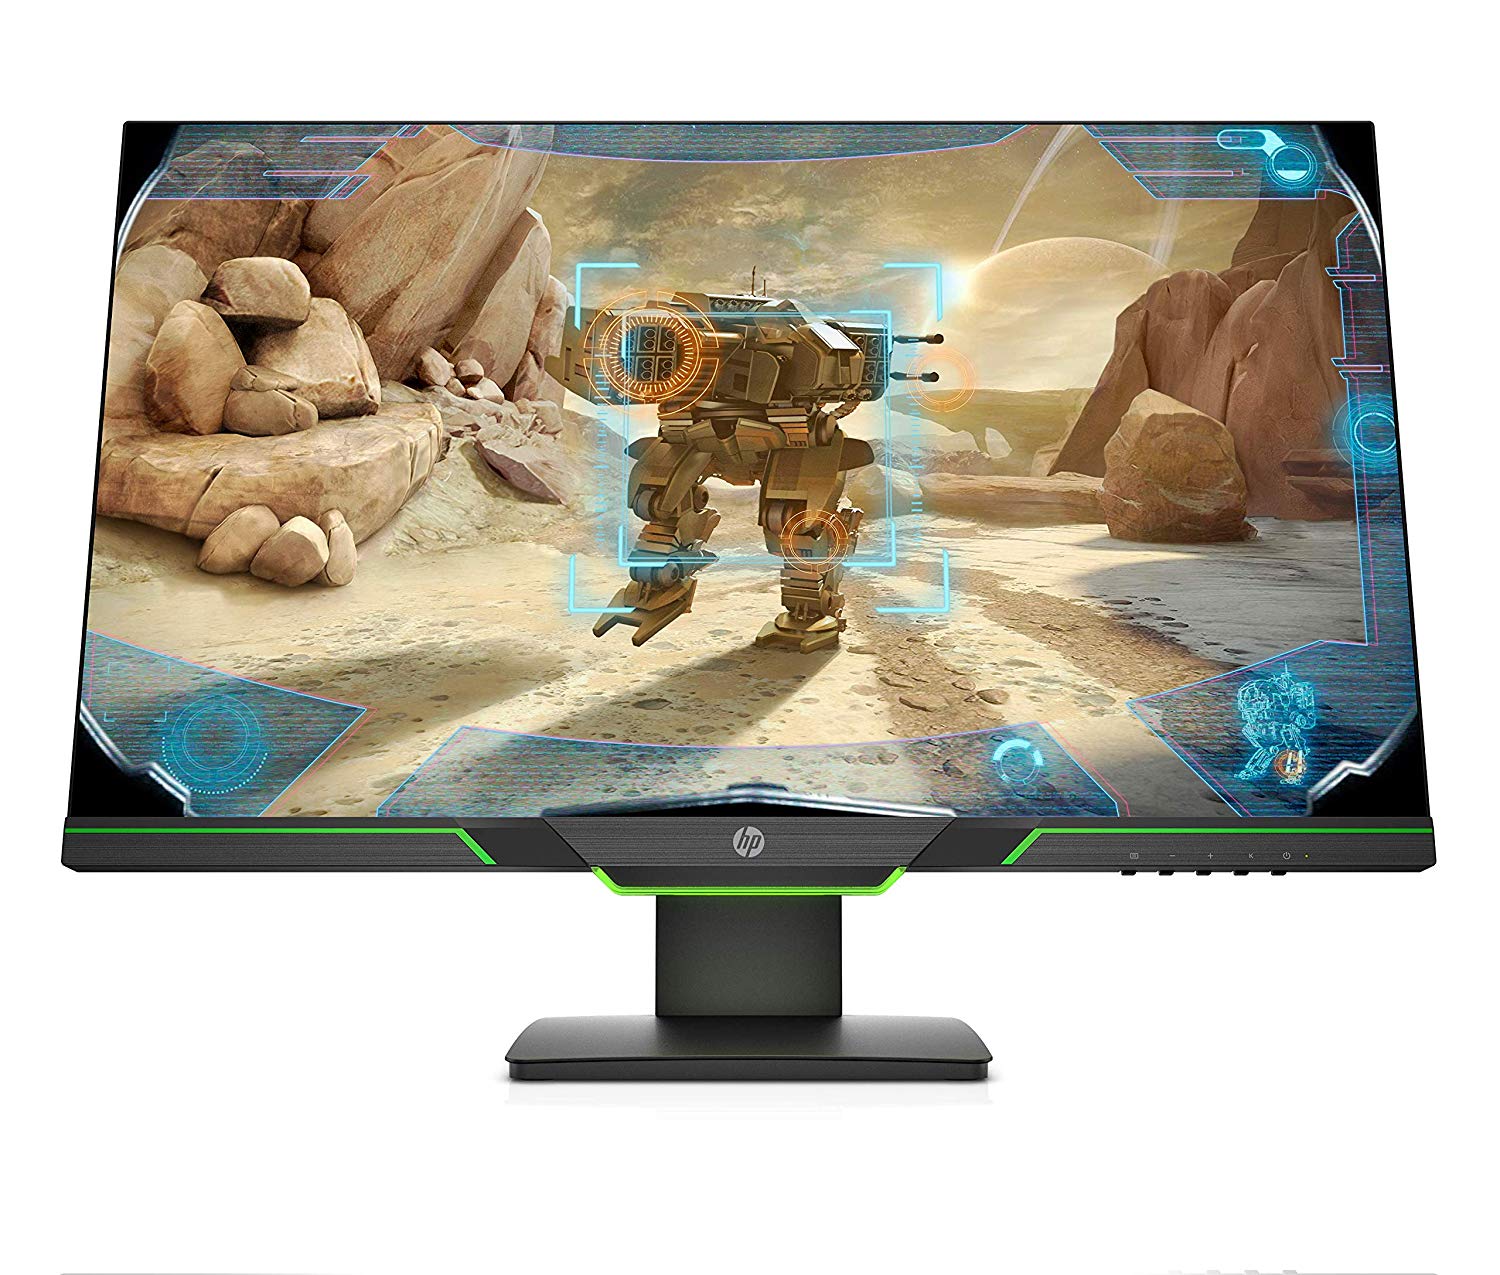 HP 27-inch FHD Gaming Monitor with Tilt/Height Adjustment